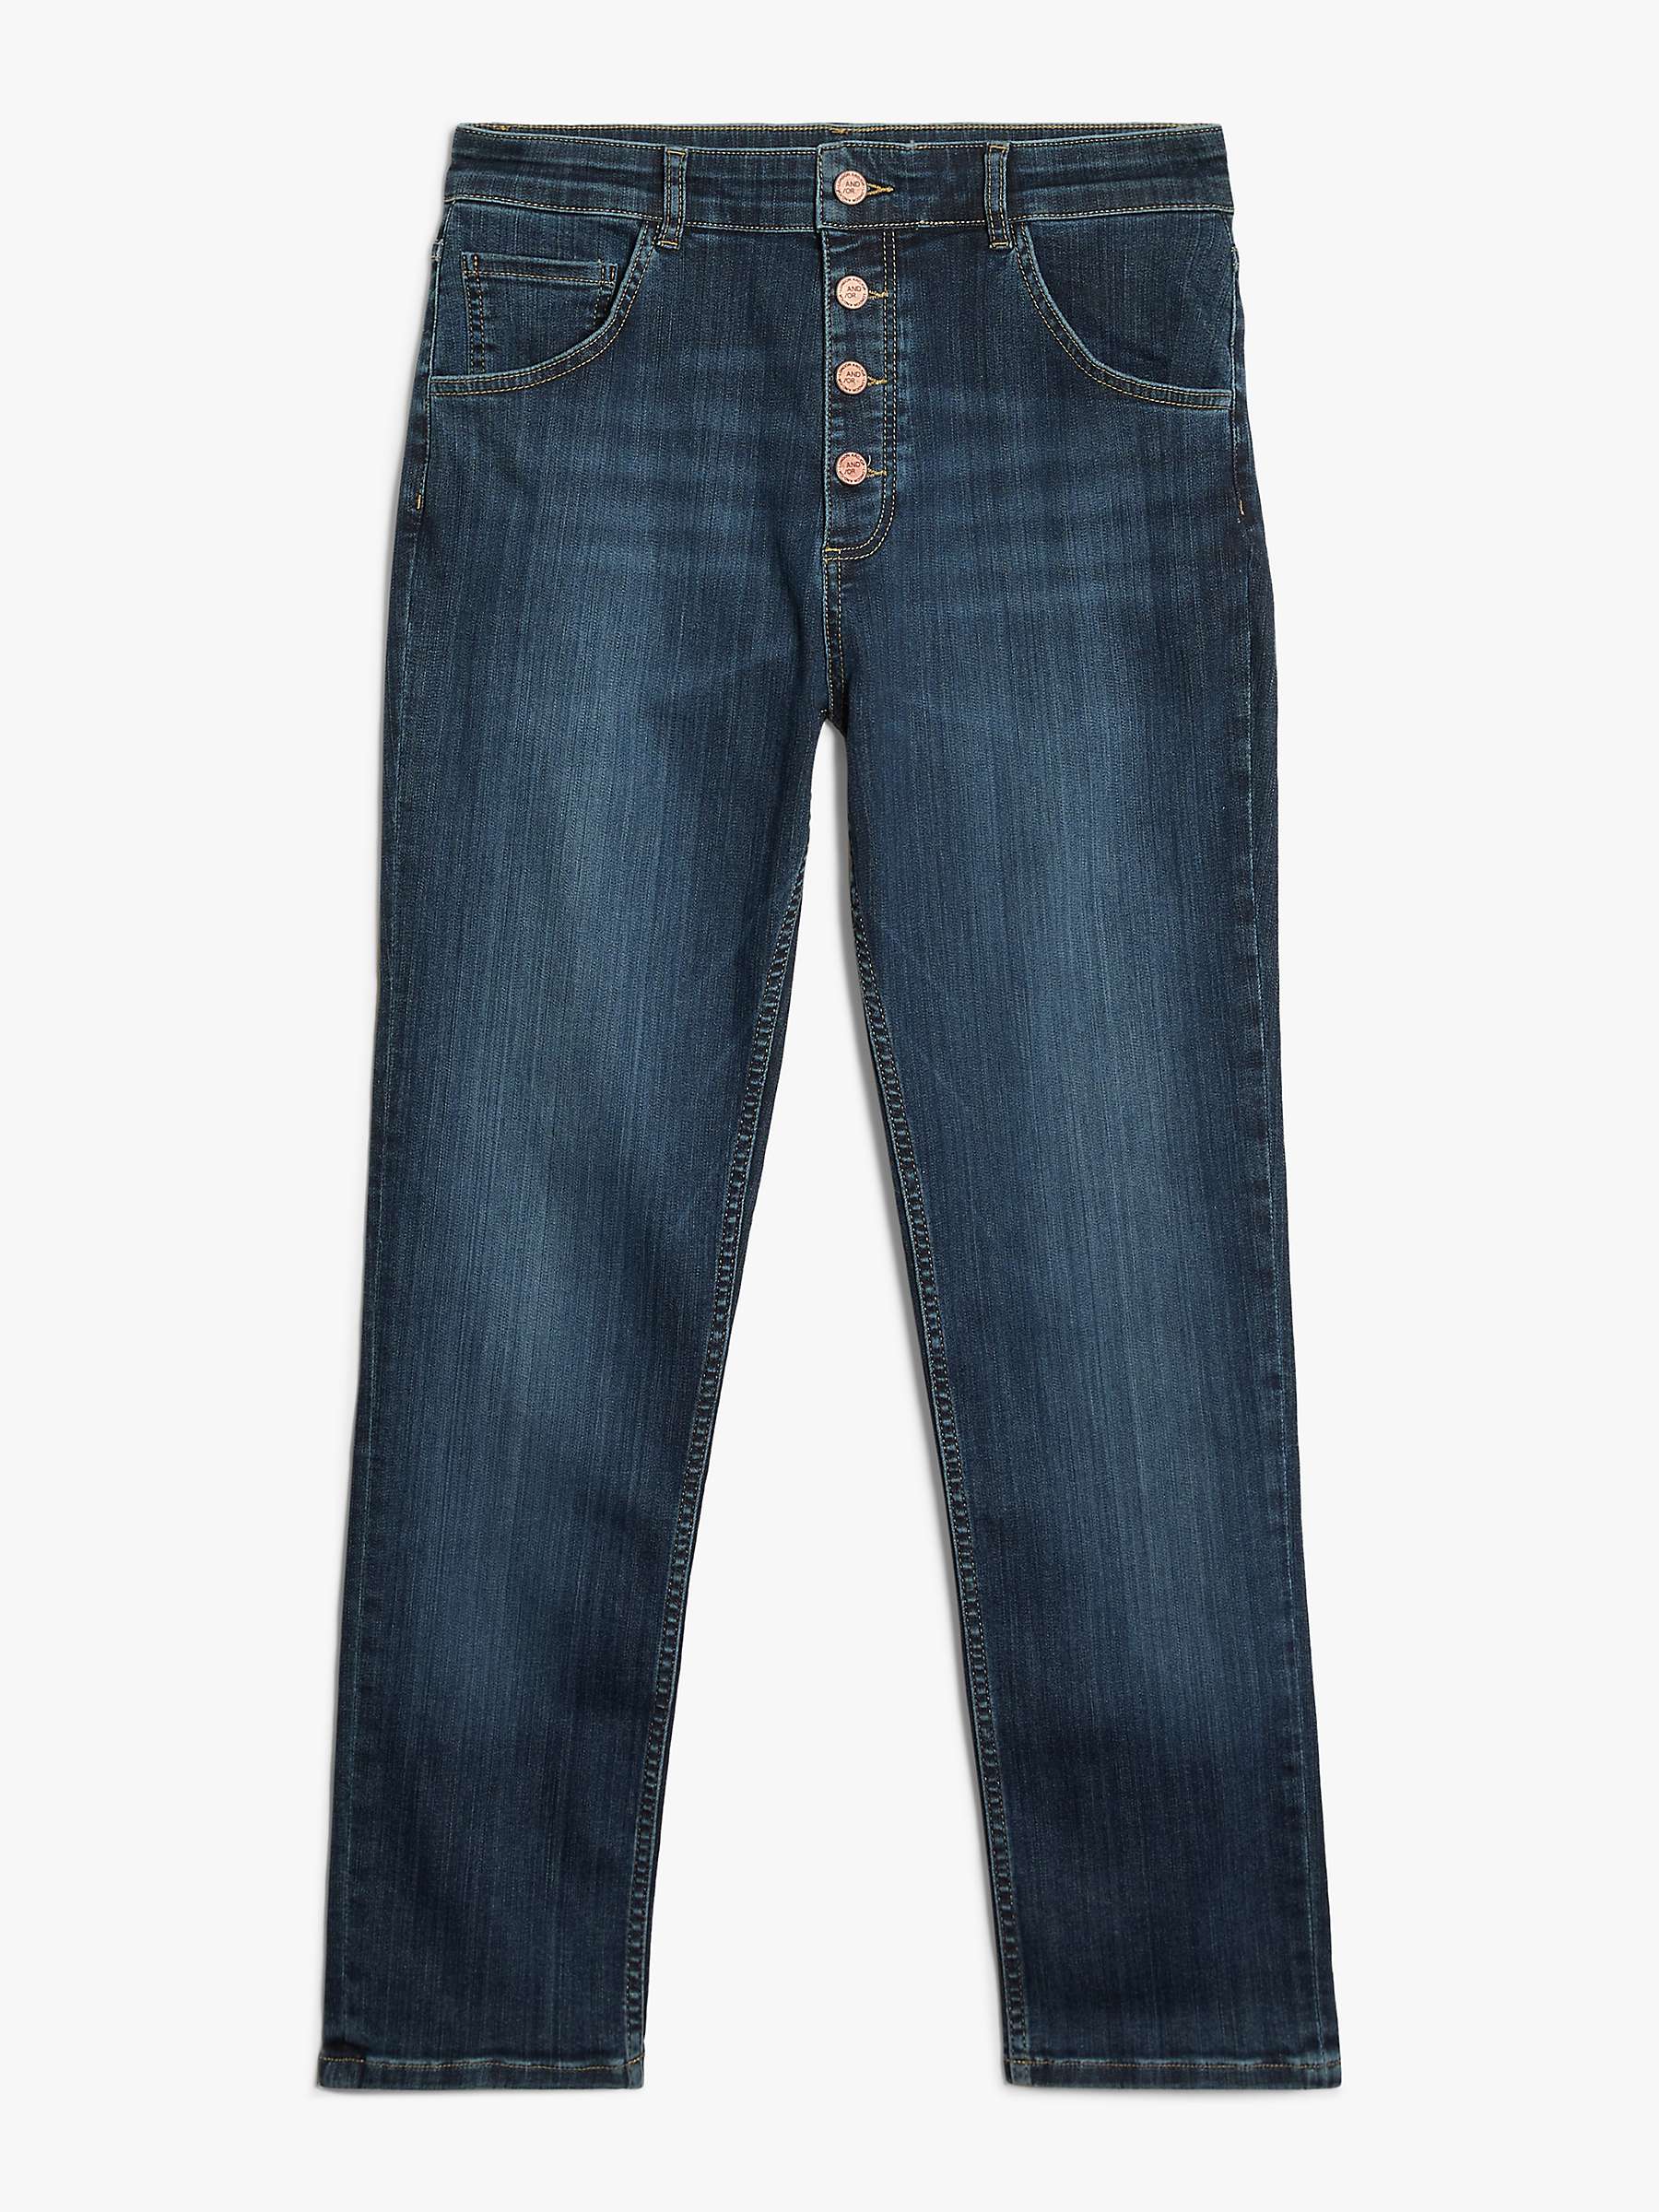 Buy AND/OR Venice Beach Boyfriend Jeans, Vintage Perfected Online at johnlewis.com